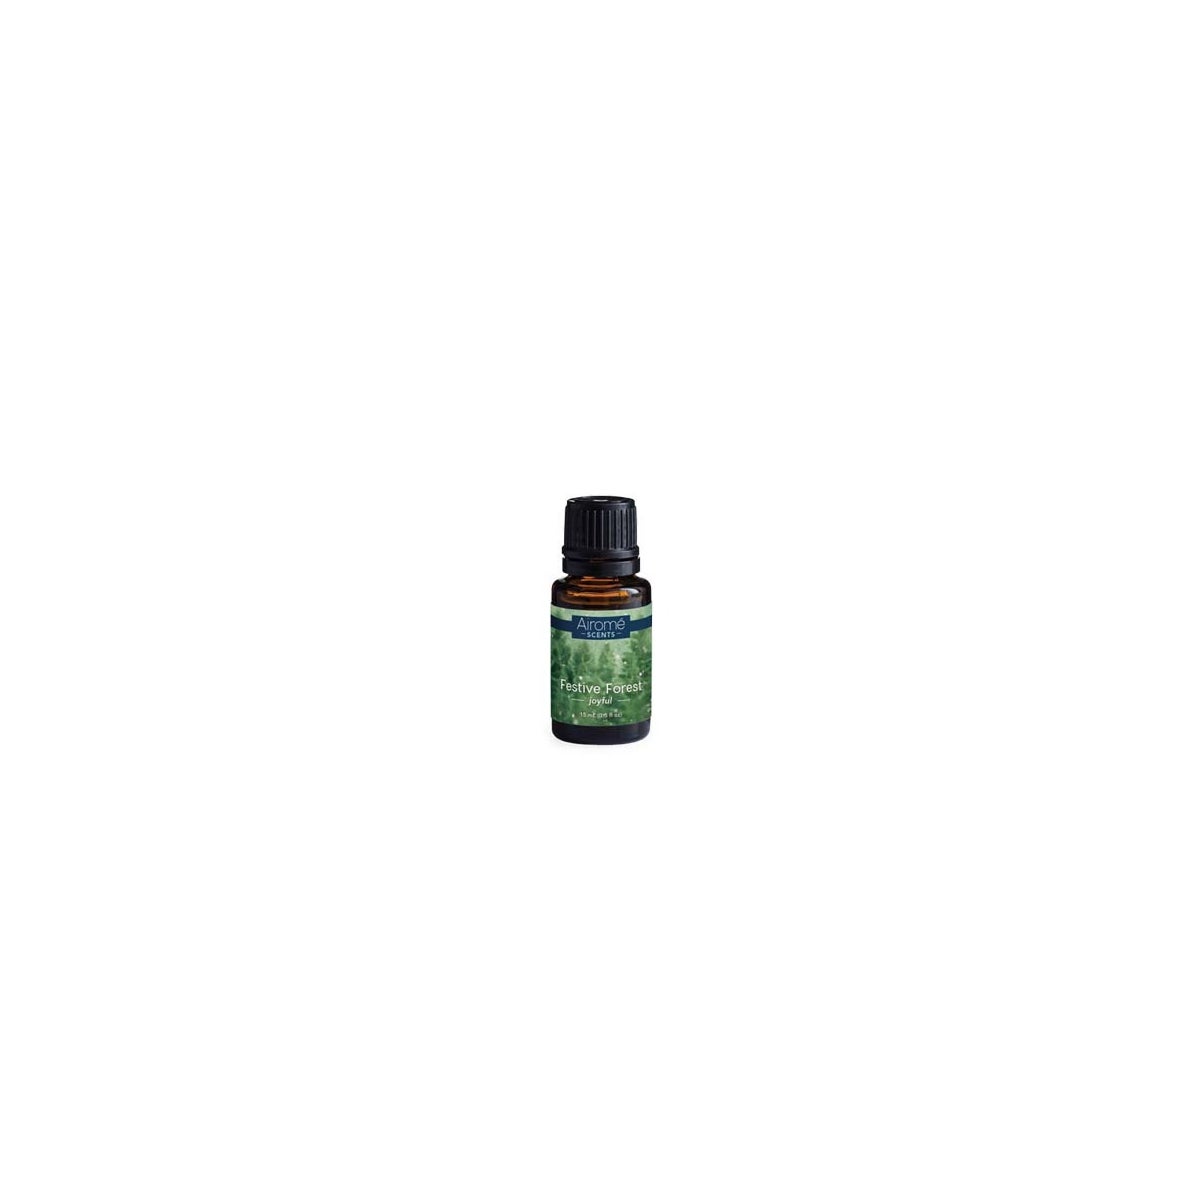 Airome Scents Essential Oil Blend 15 ml - Festive Forest